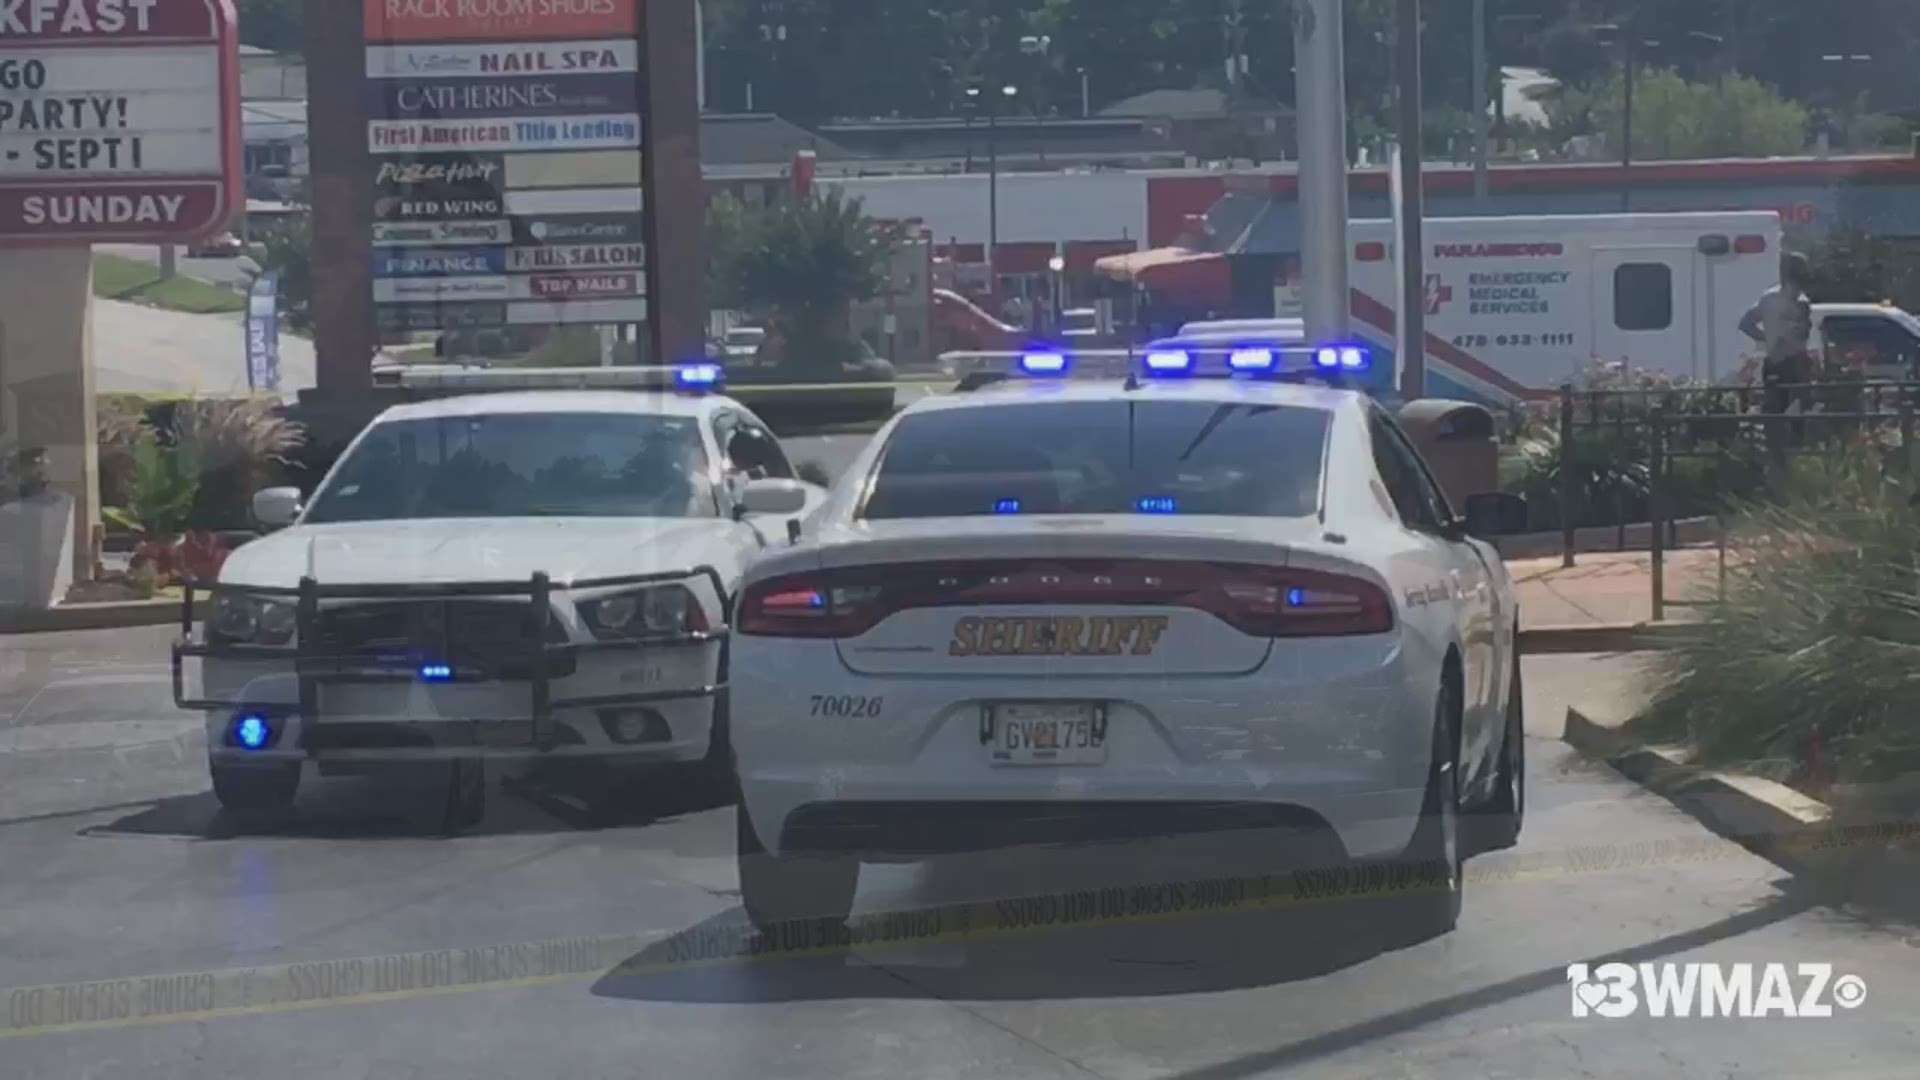 Deputies from the Bibb County Sheriff's Office and Bibb County coroners have arrived to the scene of an apparent homicide at the Chick-Fil-A on Bloomfield Road